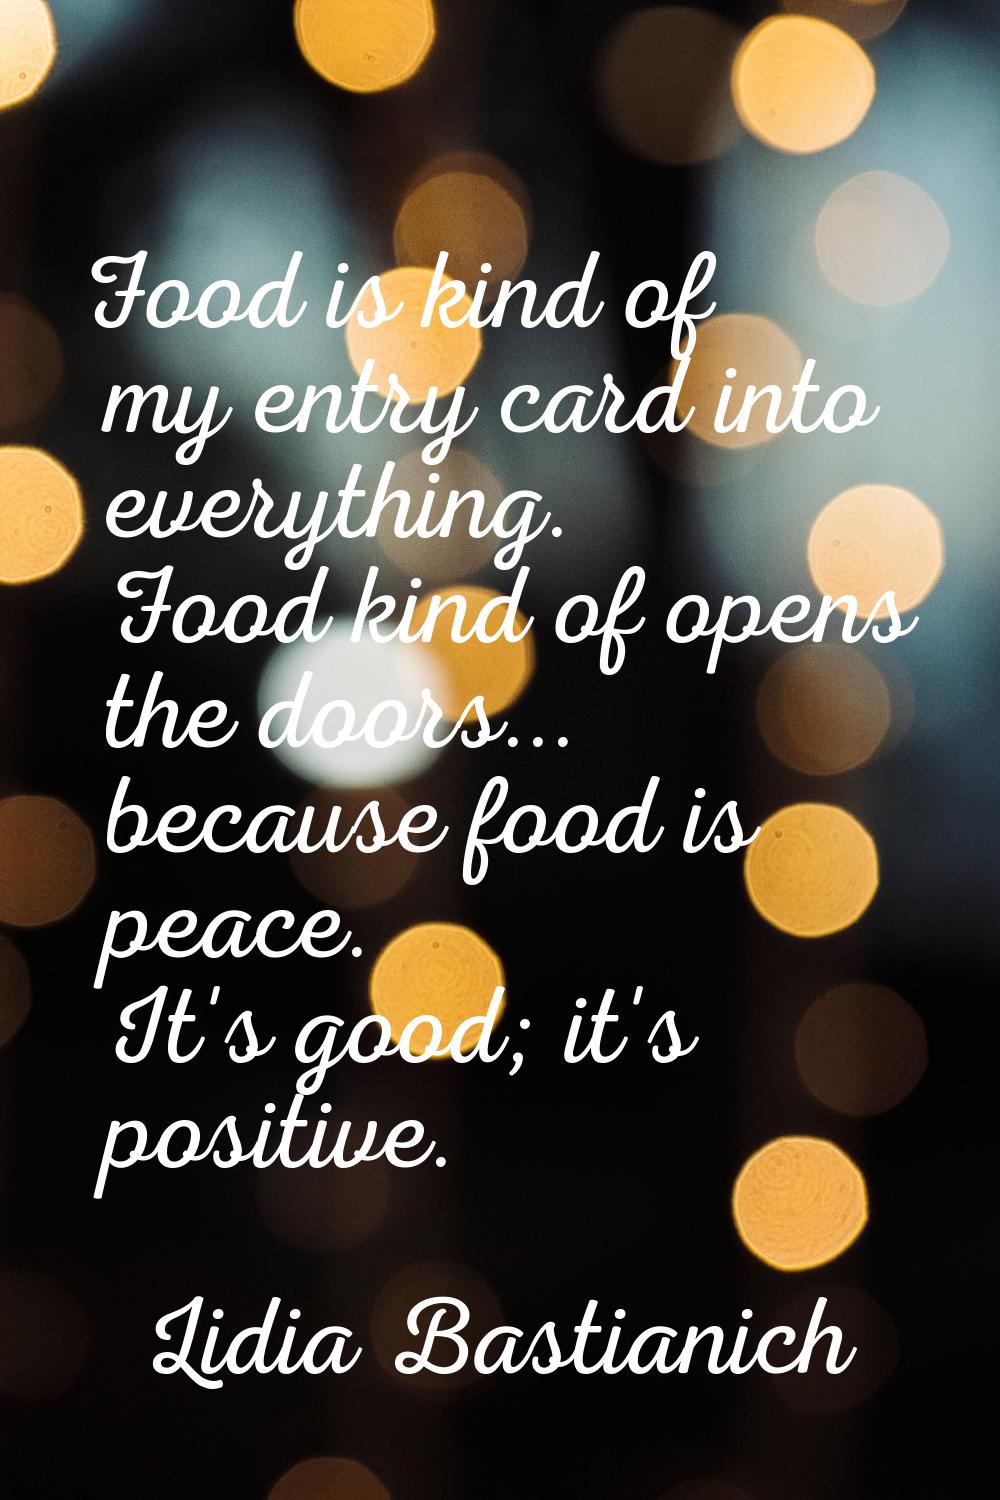 Food is kind of my entry card into everything. Food kind of opens the doors... because food is peac